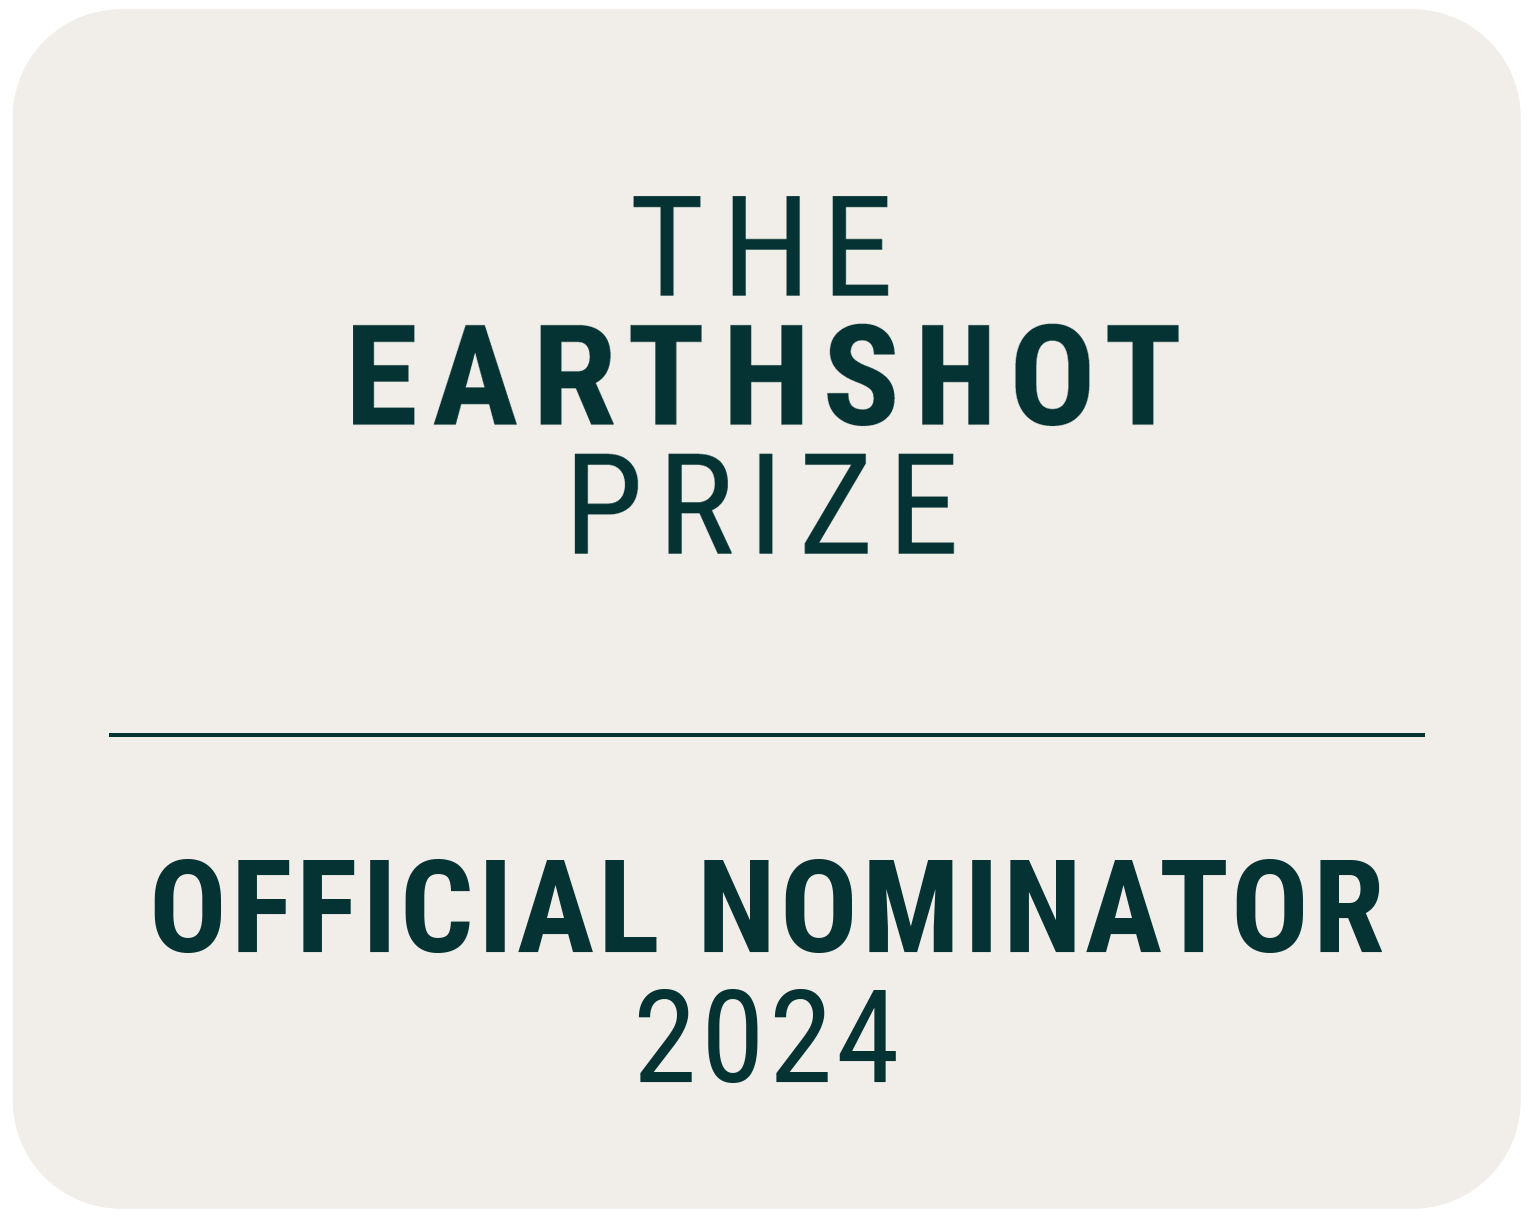 BVRio on the search for the 2024 Earthshot Prize winners as Official Nominator BVRIO